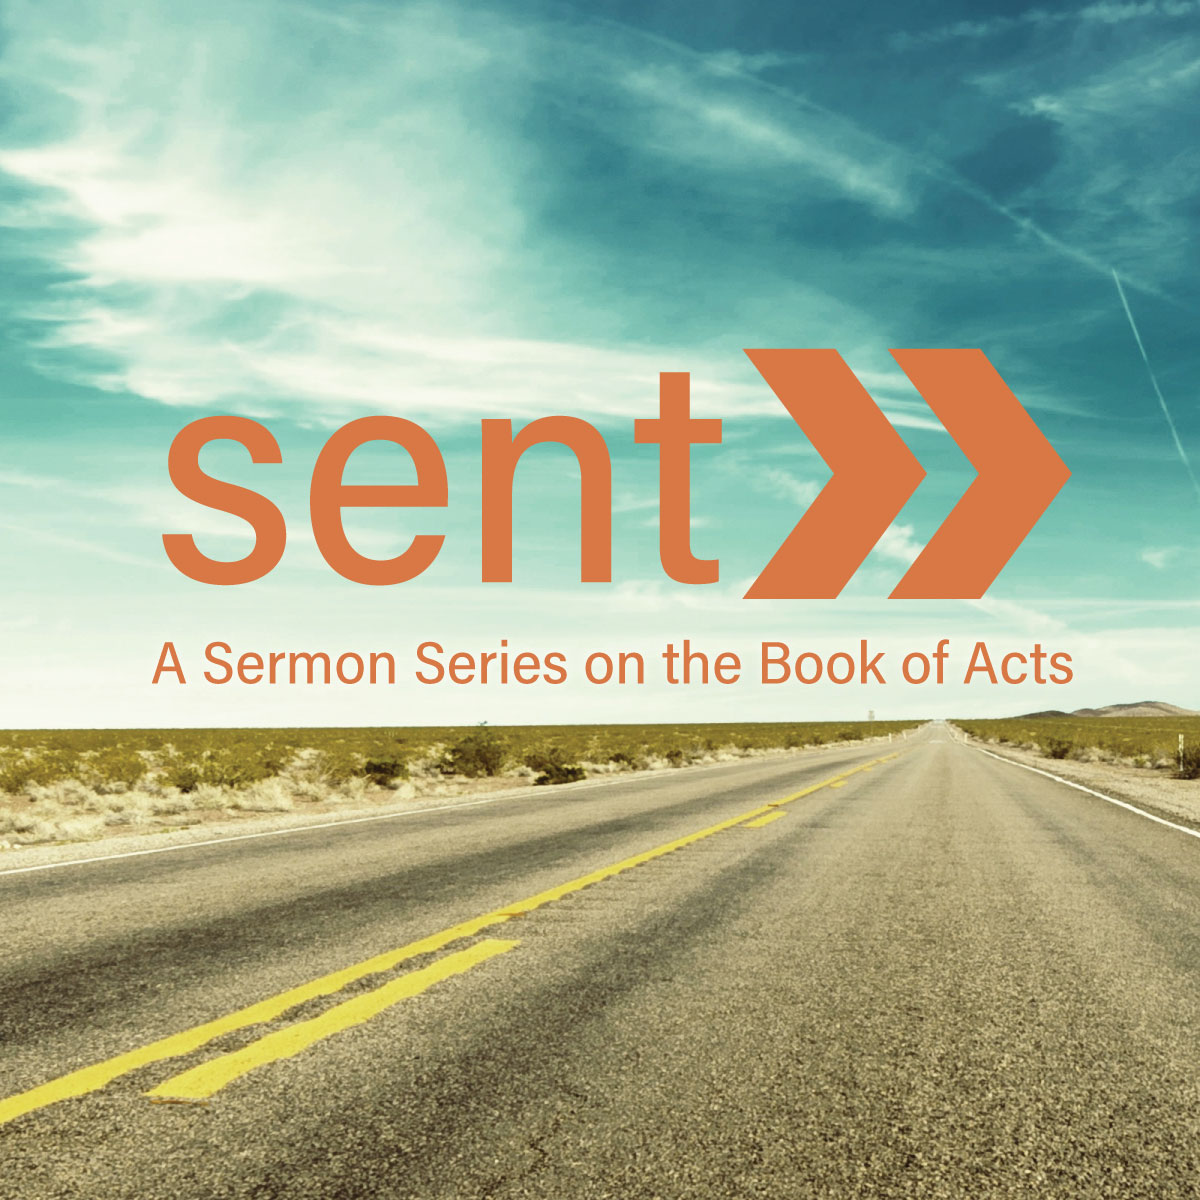 Acts 9:19-31 Saul Faces Opposition